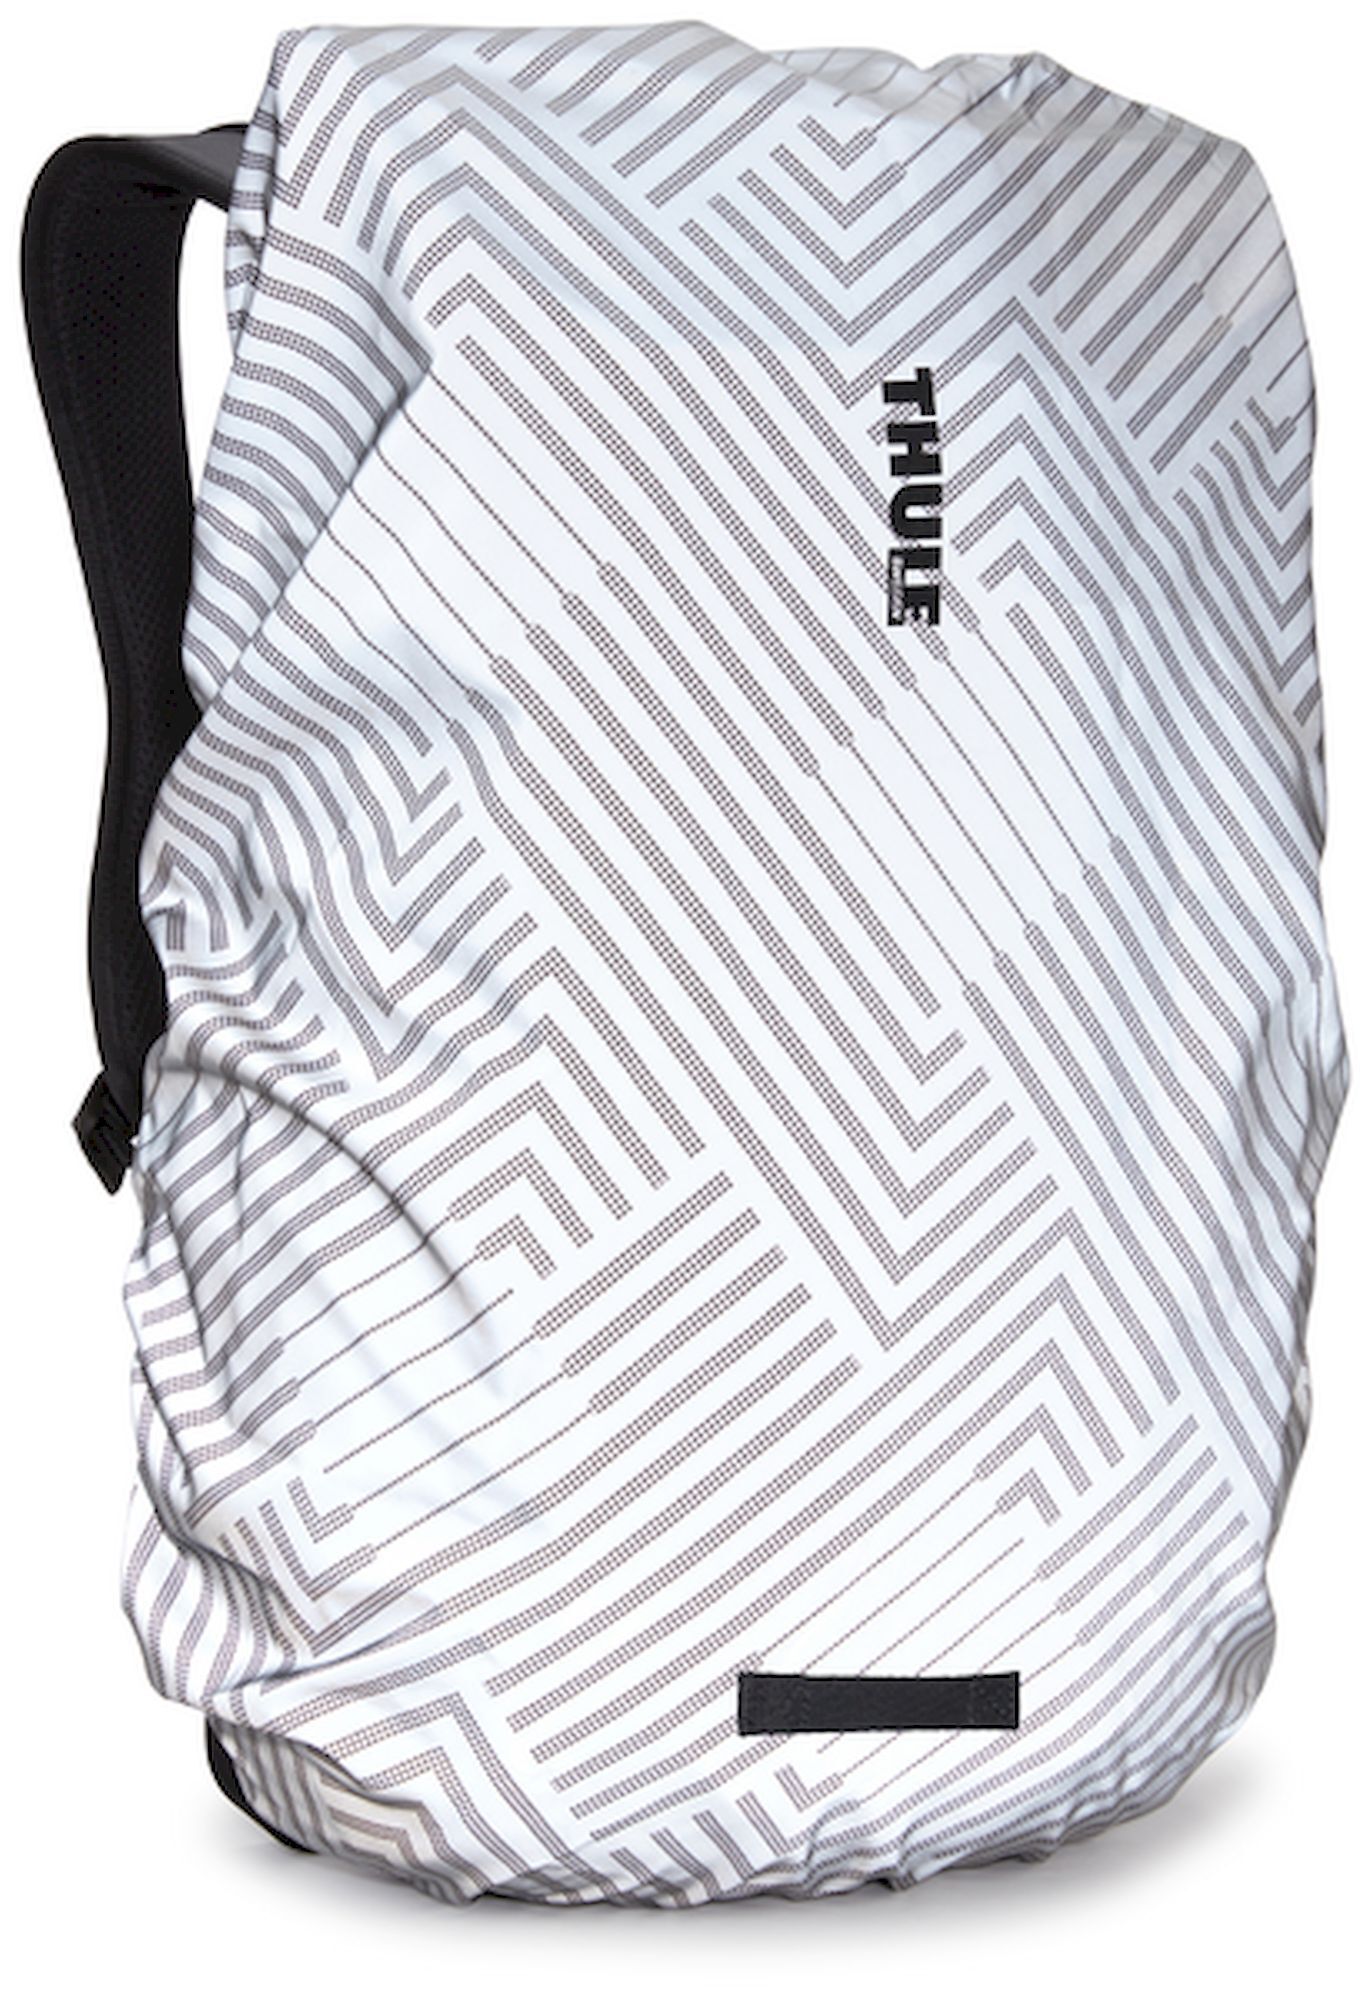 Thule Paramount Rain Cover - Protection pluie sac à dos | Hardloop